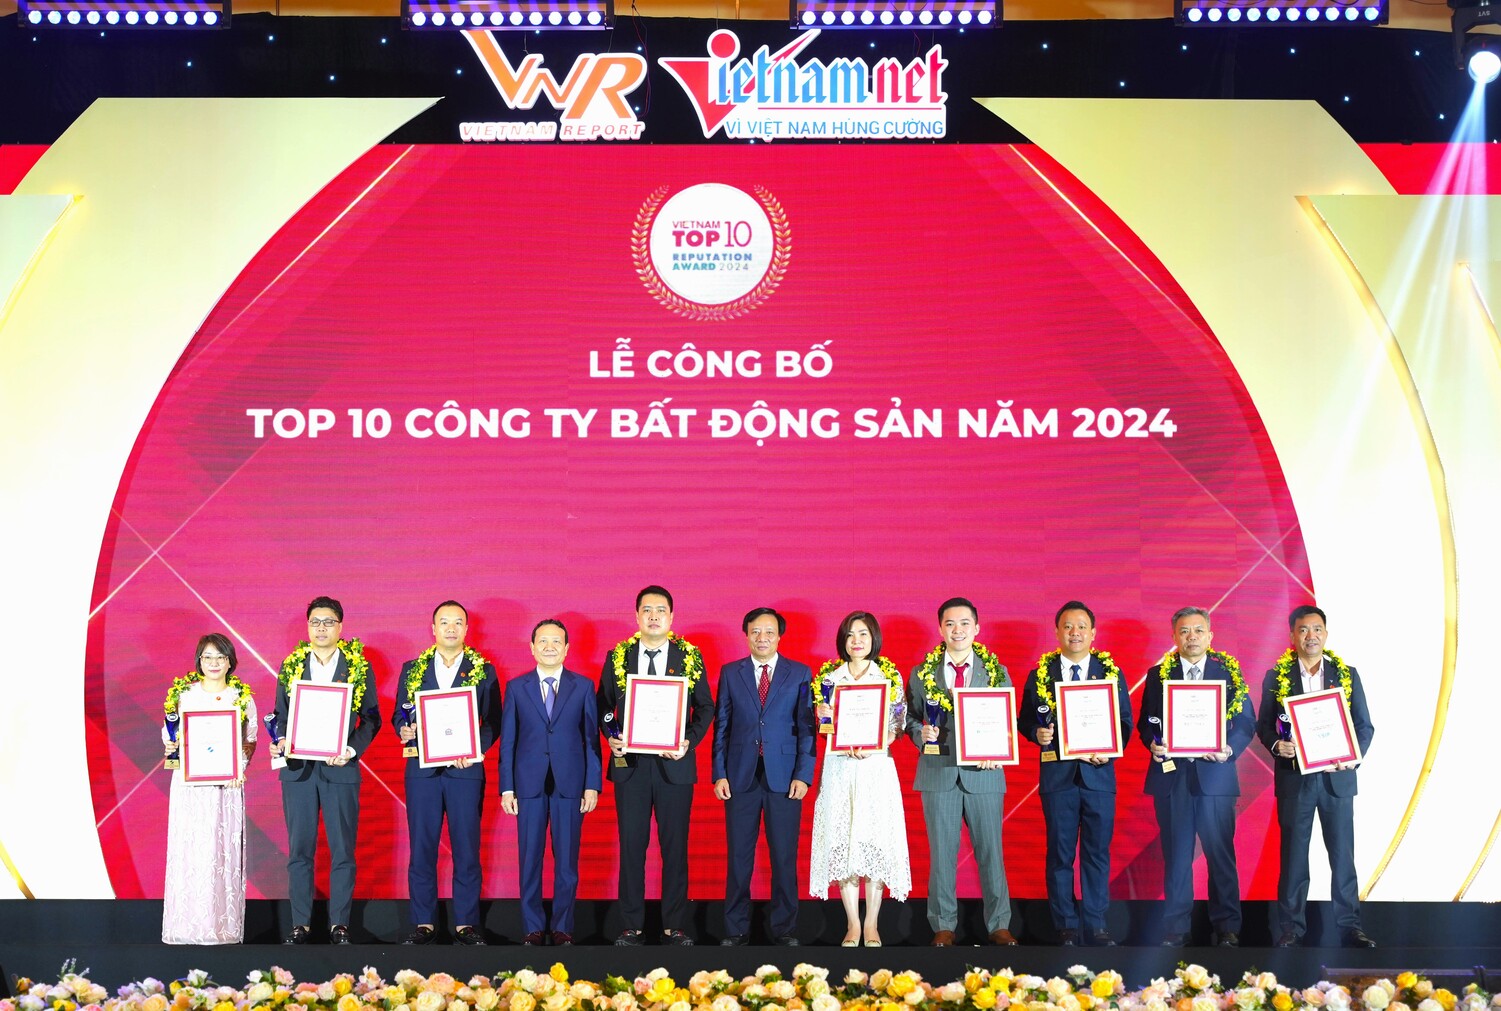 The organizer honors the Top 10 Real Estate Companies in 2024